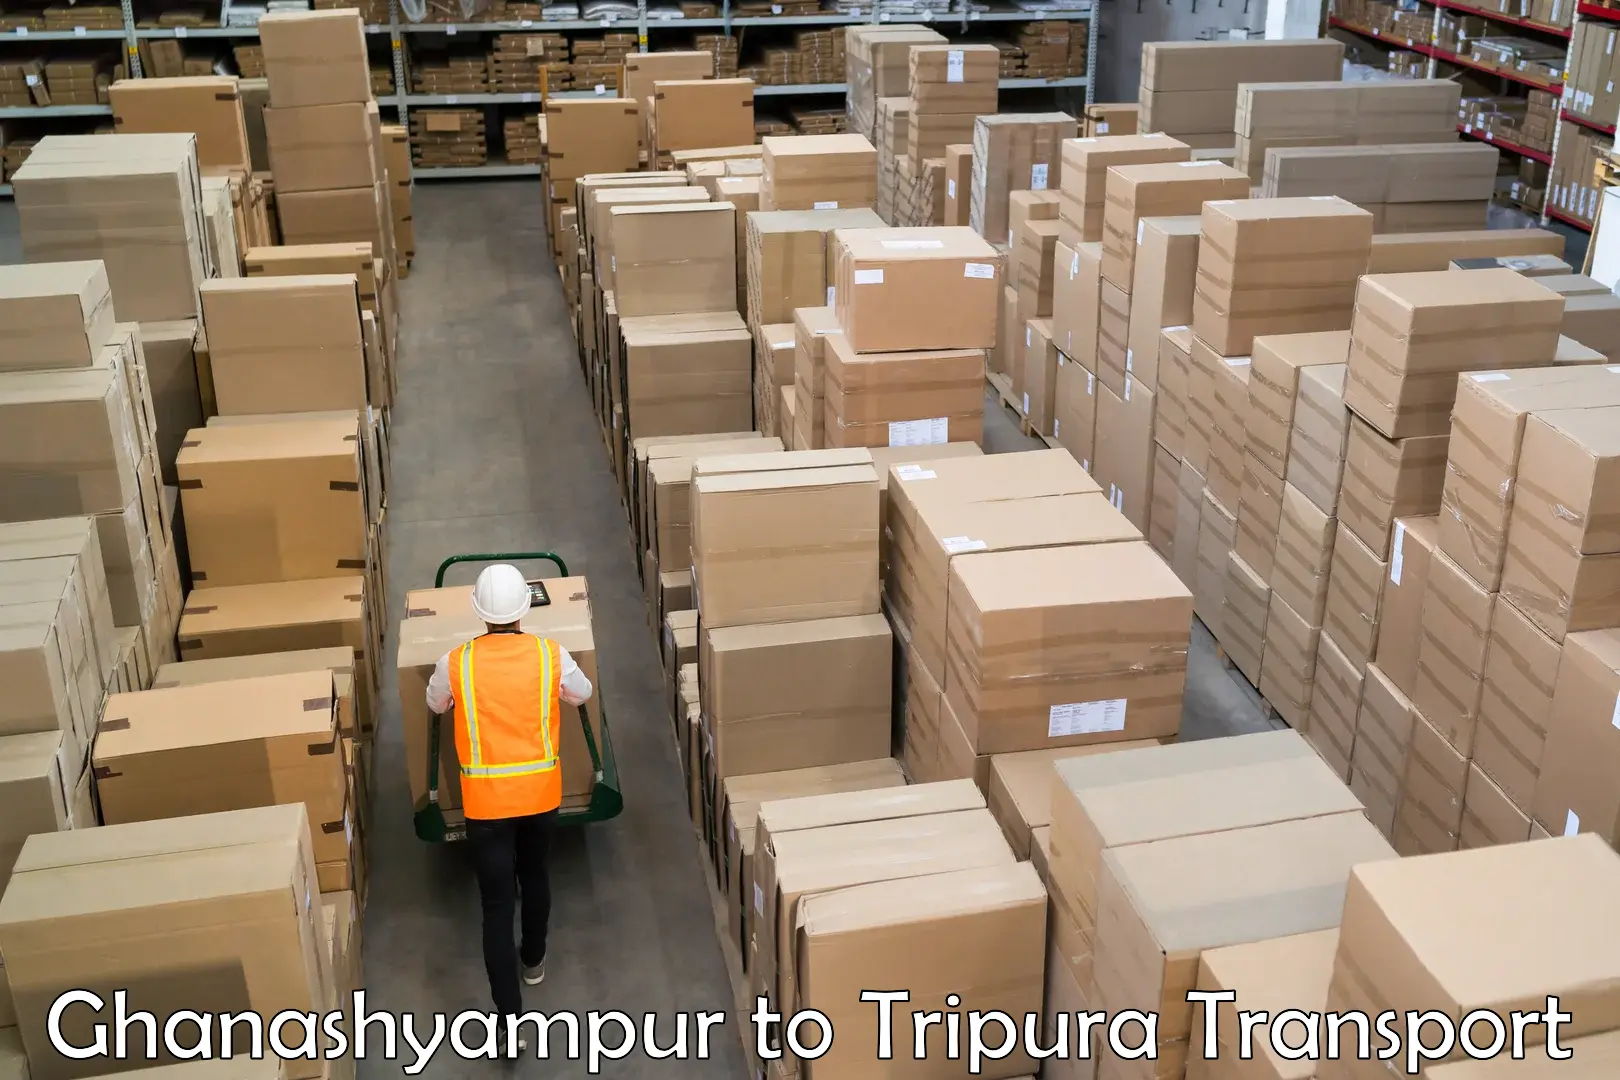 Part load transport service in India Ghanashyampur to Udaipur Tripura